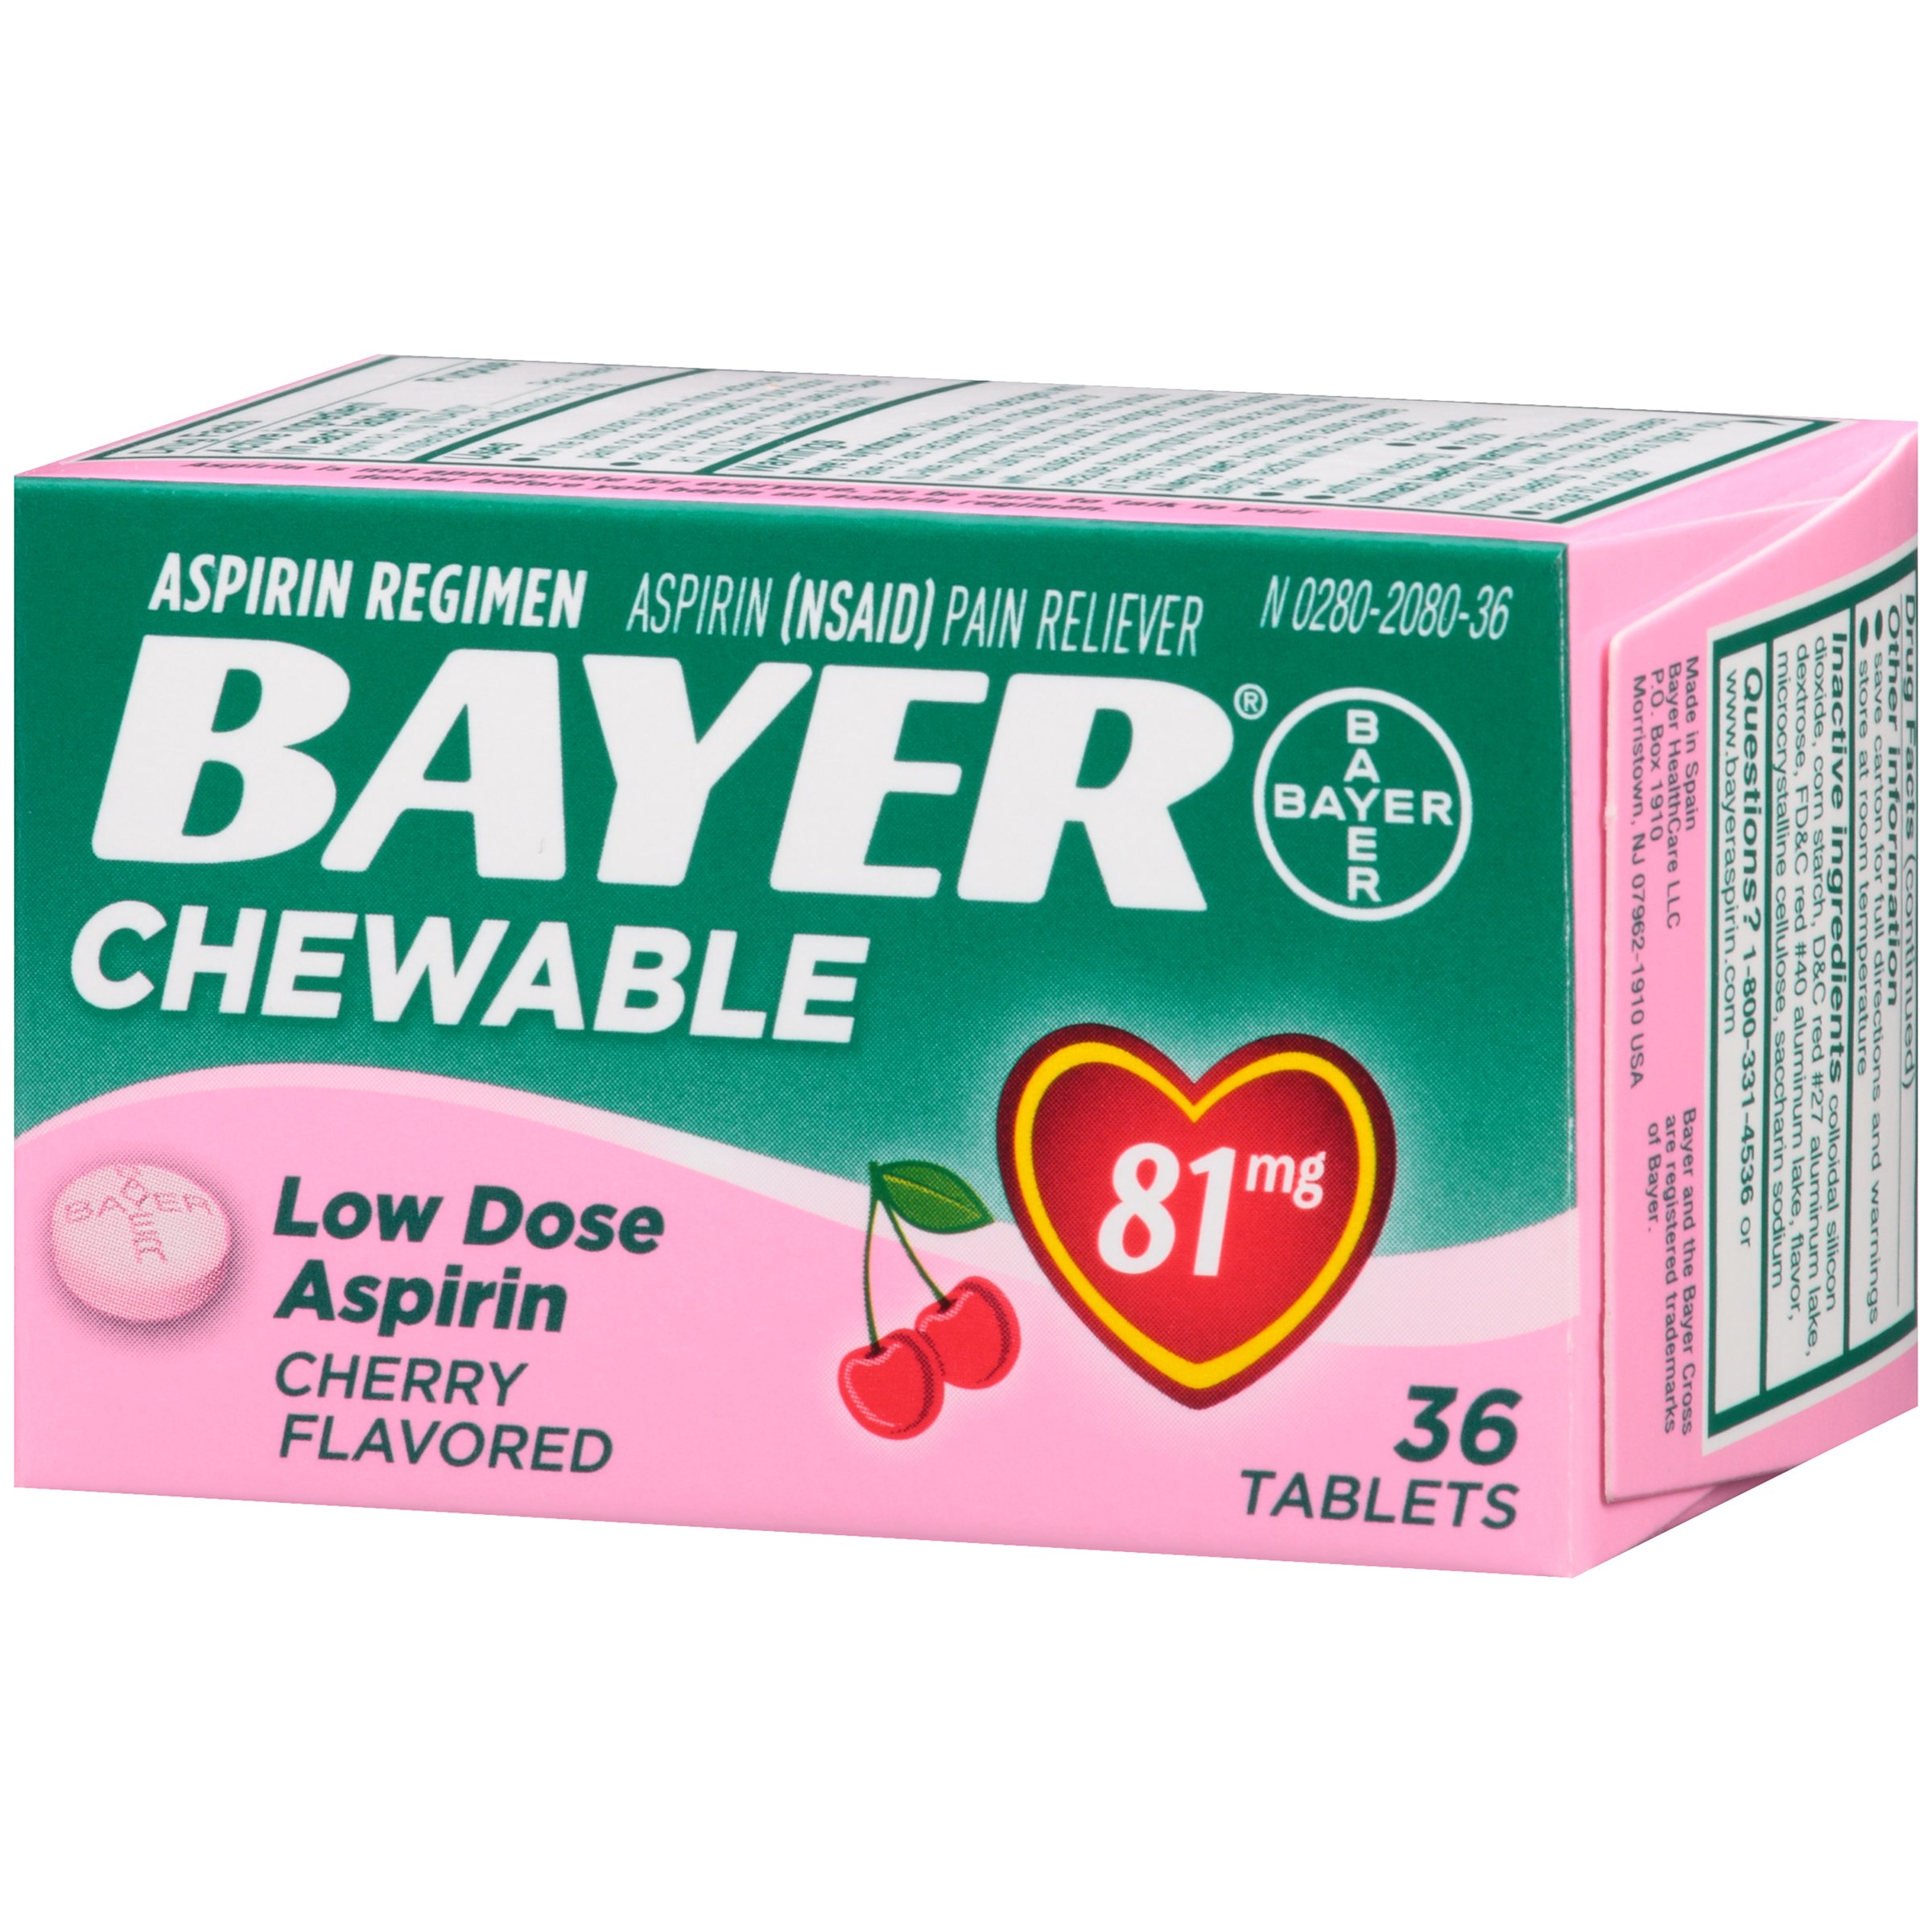 Bayer Aspirin Regimen, 81mg Chewable Tablets, Pain Reliever, Cherry, 36 Count (Pack of 2)